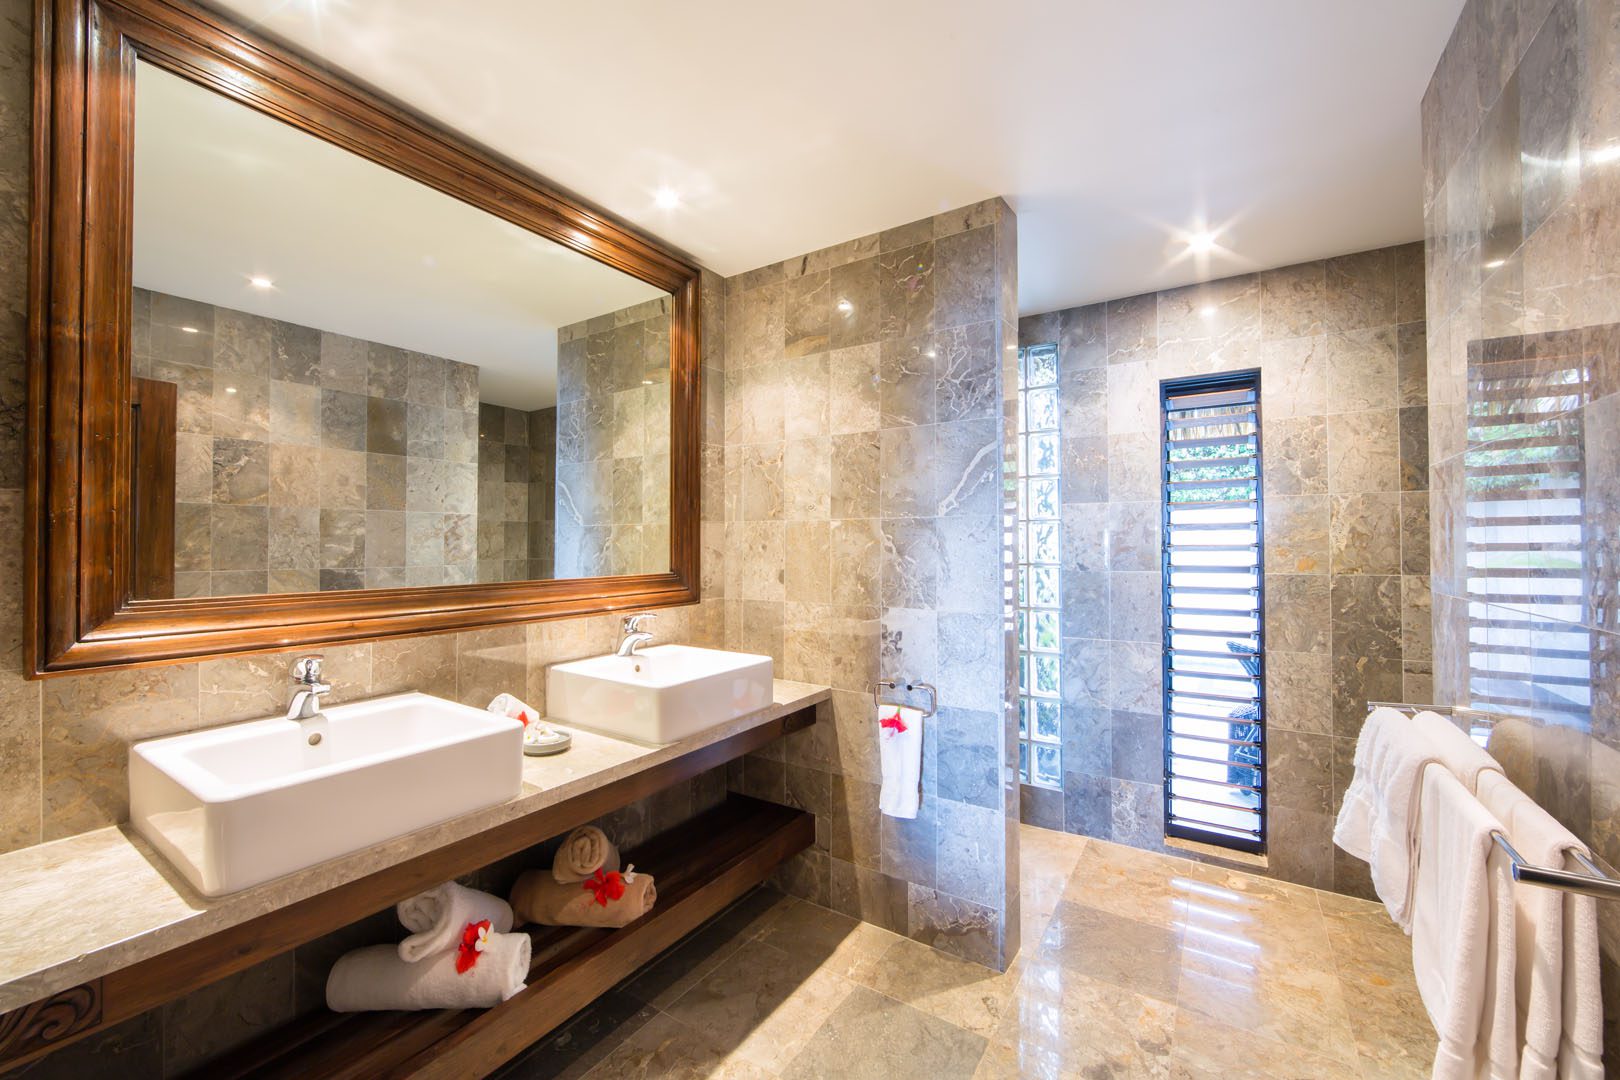 inside view of the Ultimate Beachfront Villa Bathroom, with beautiful tiles and modern styling